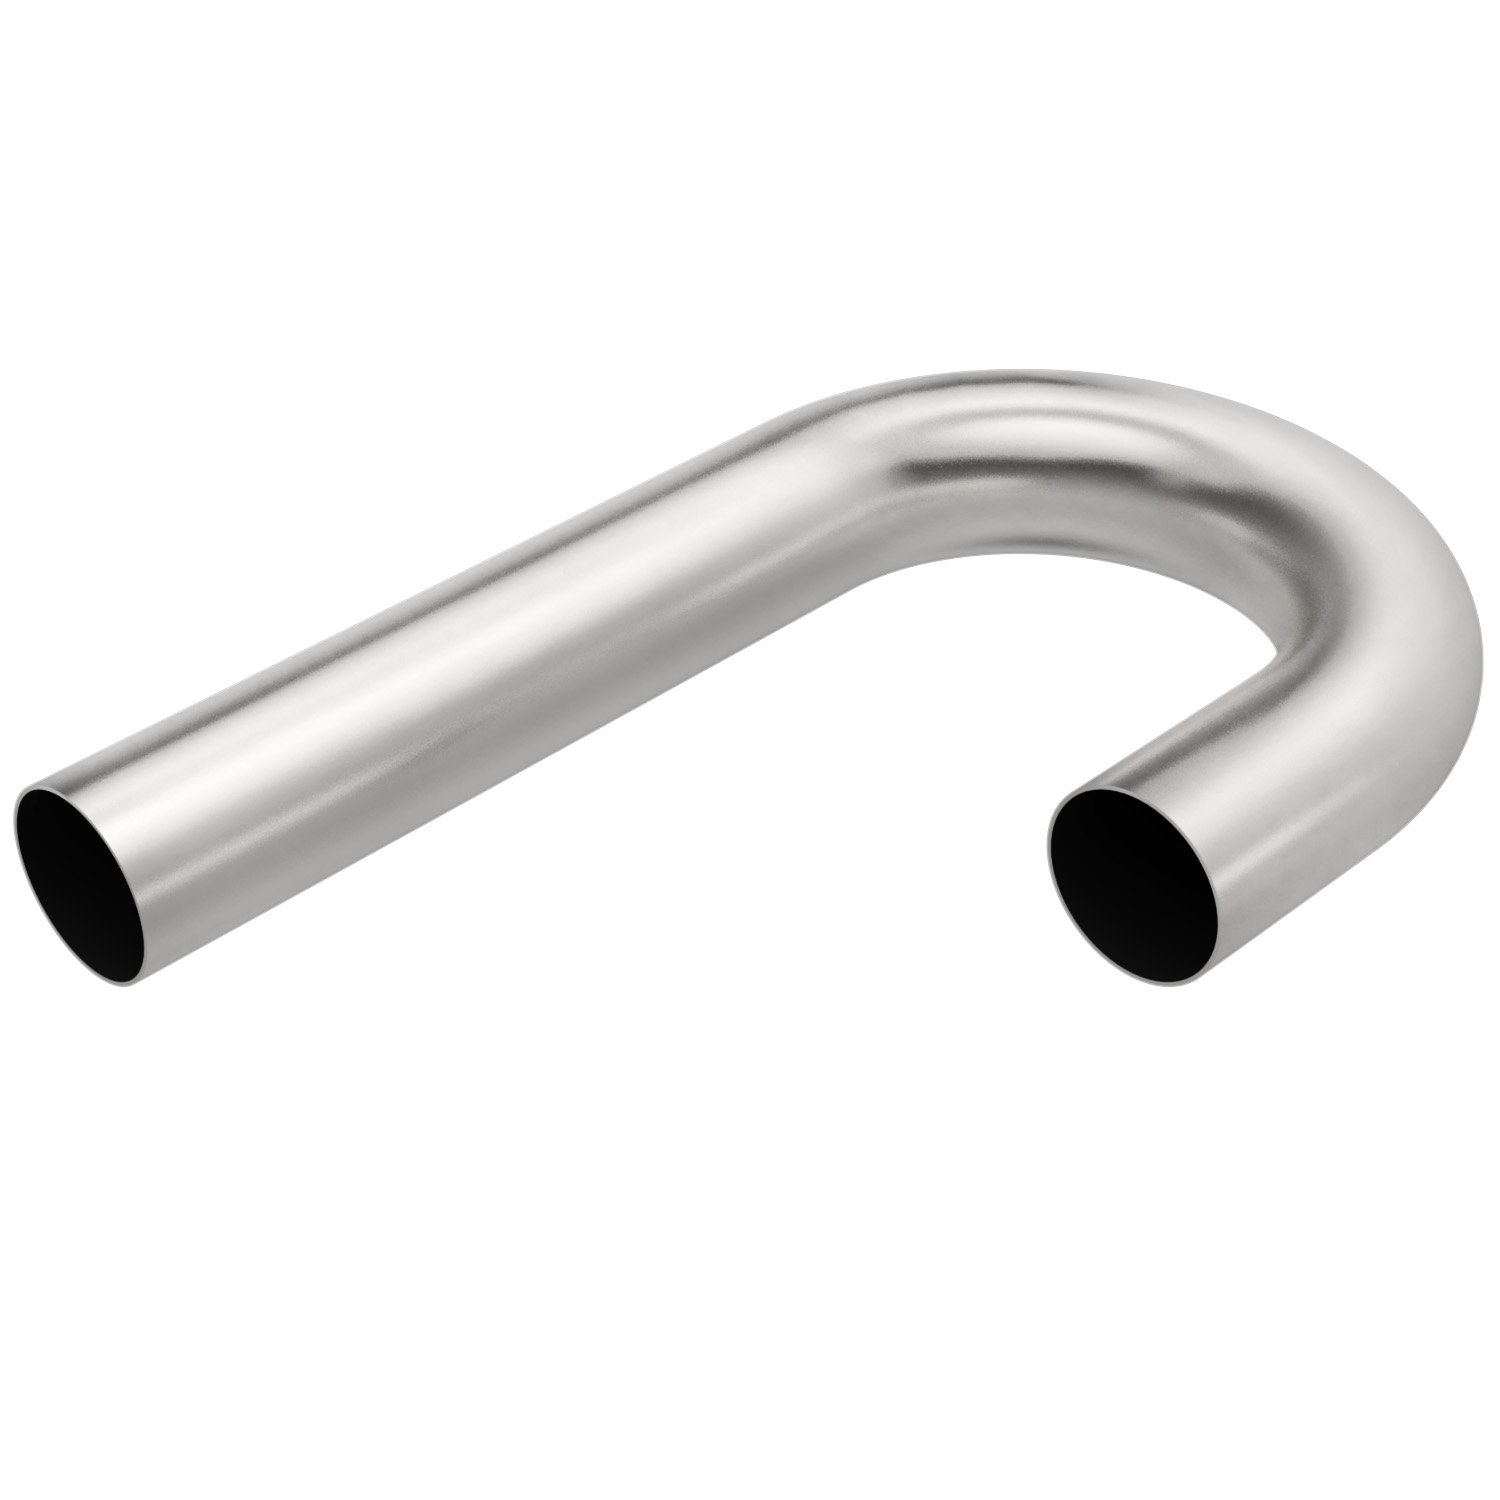 Stainless Steel 180° Transition Exhaust Pipes Outside Diameter: